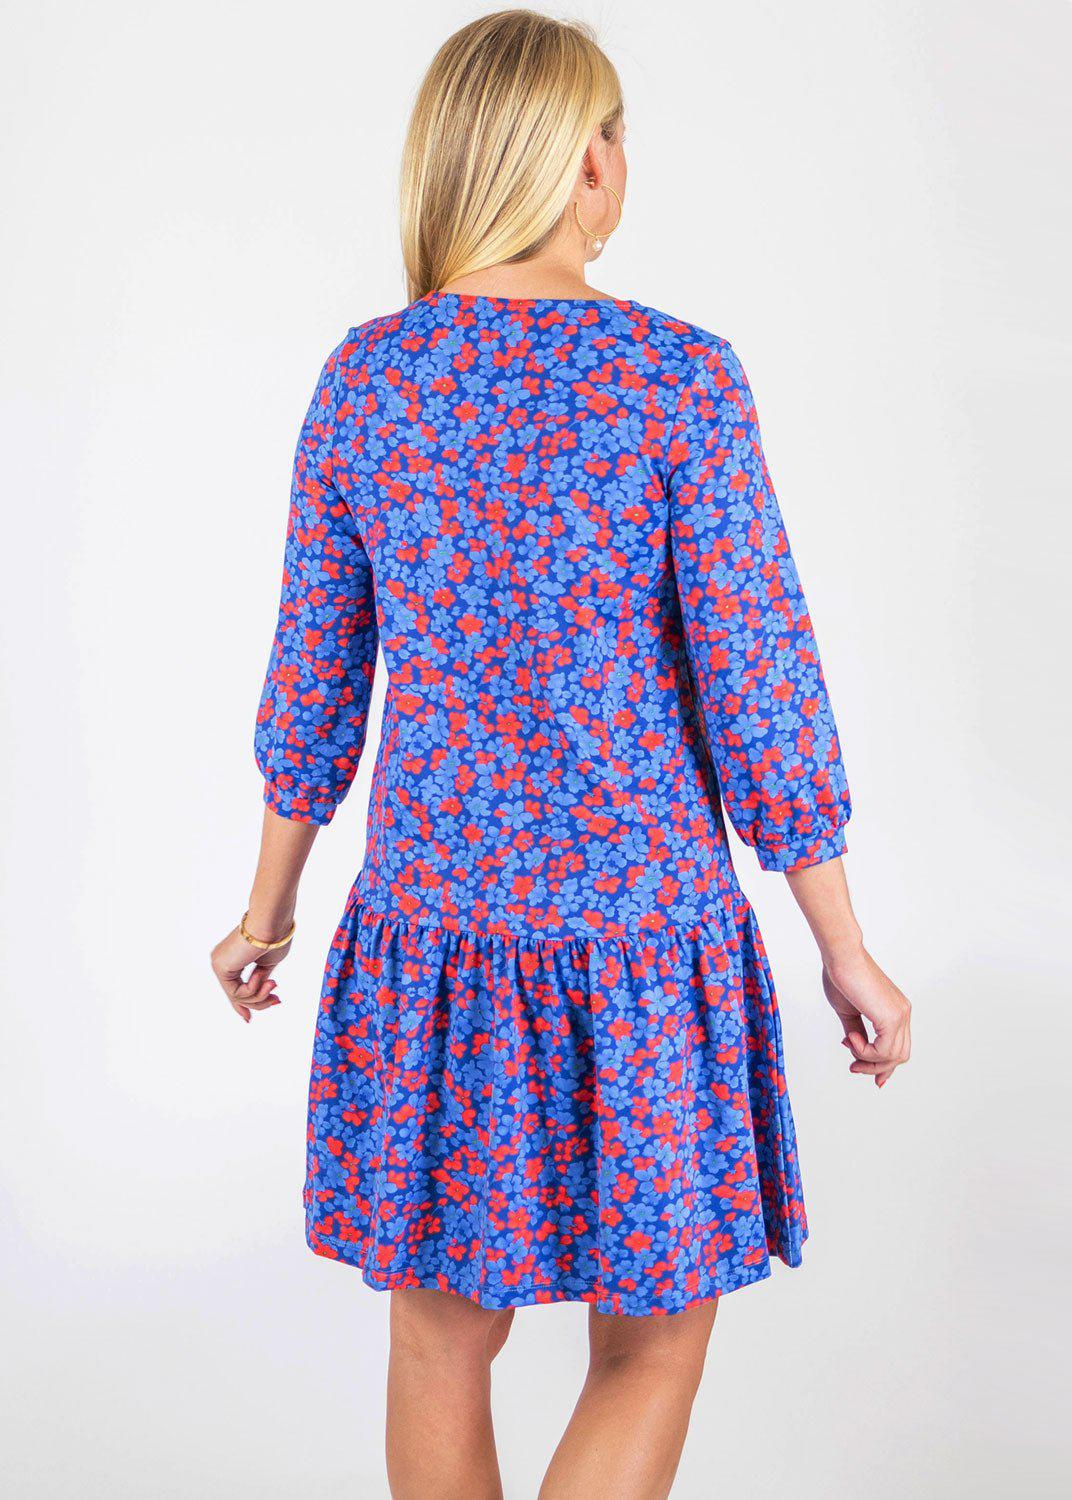 4 Sleeve Dress in a Floral Print